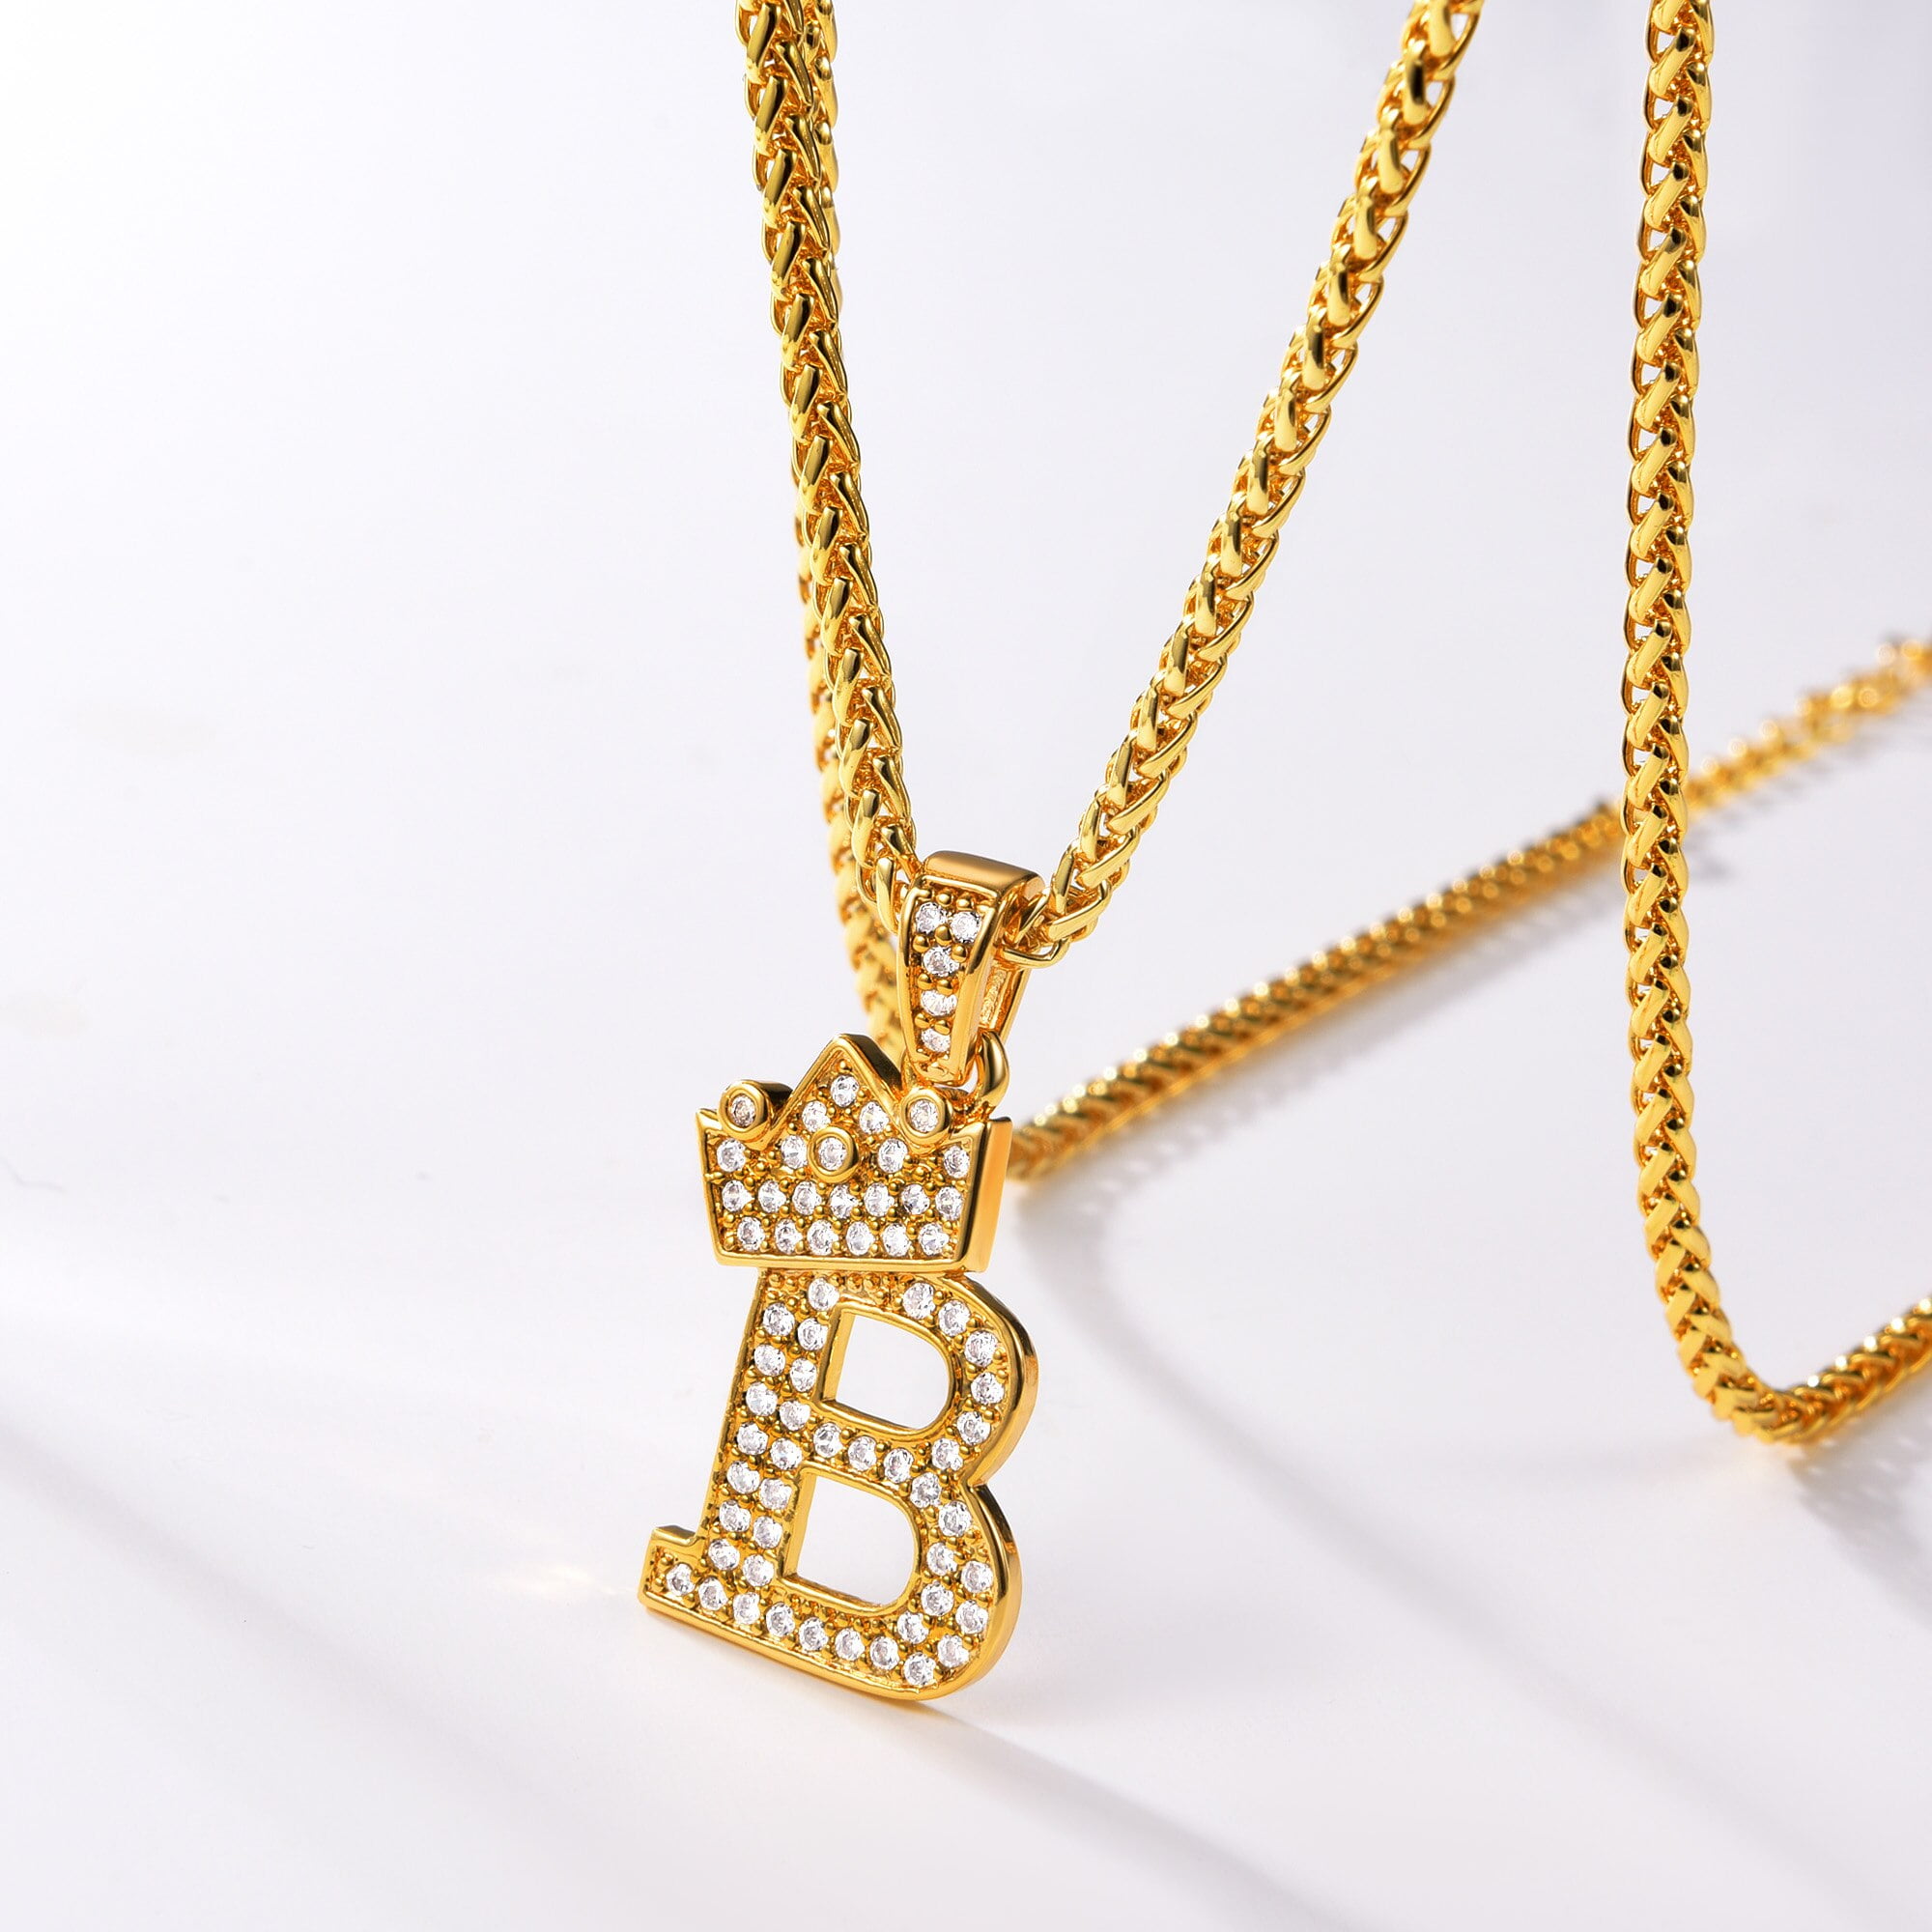 16+ Necklace With Letter B